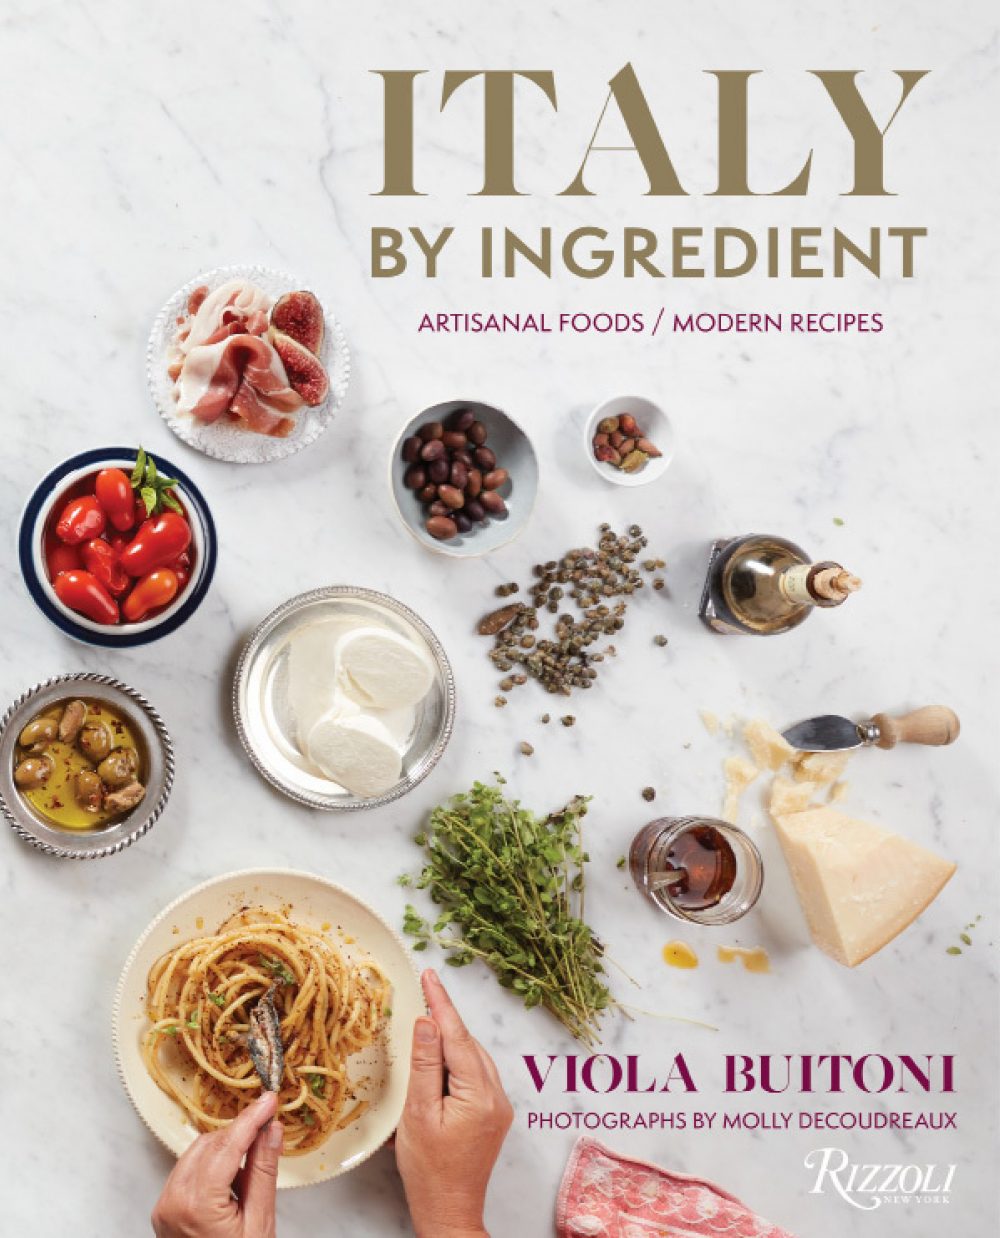 Book Review i44 Italy by Ingredient